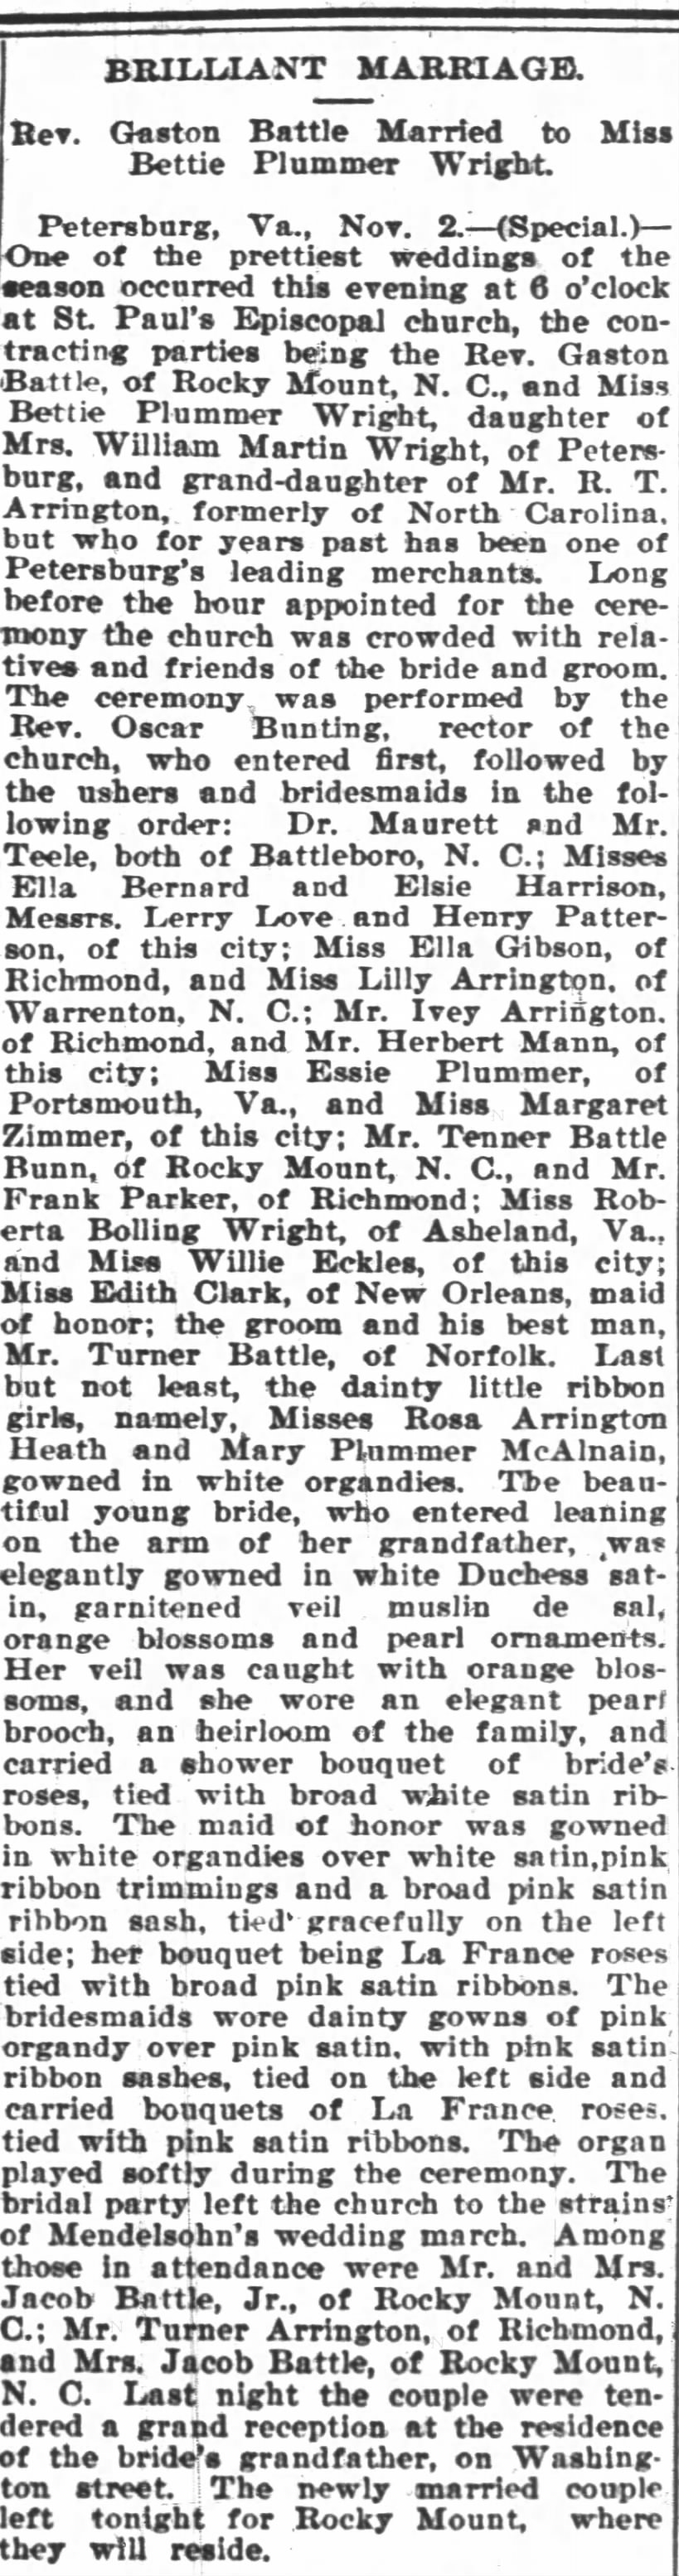 The wedding of Gaston Battle and Bettie Plummer Wright at St. Paul's